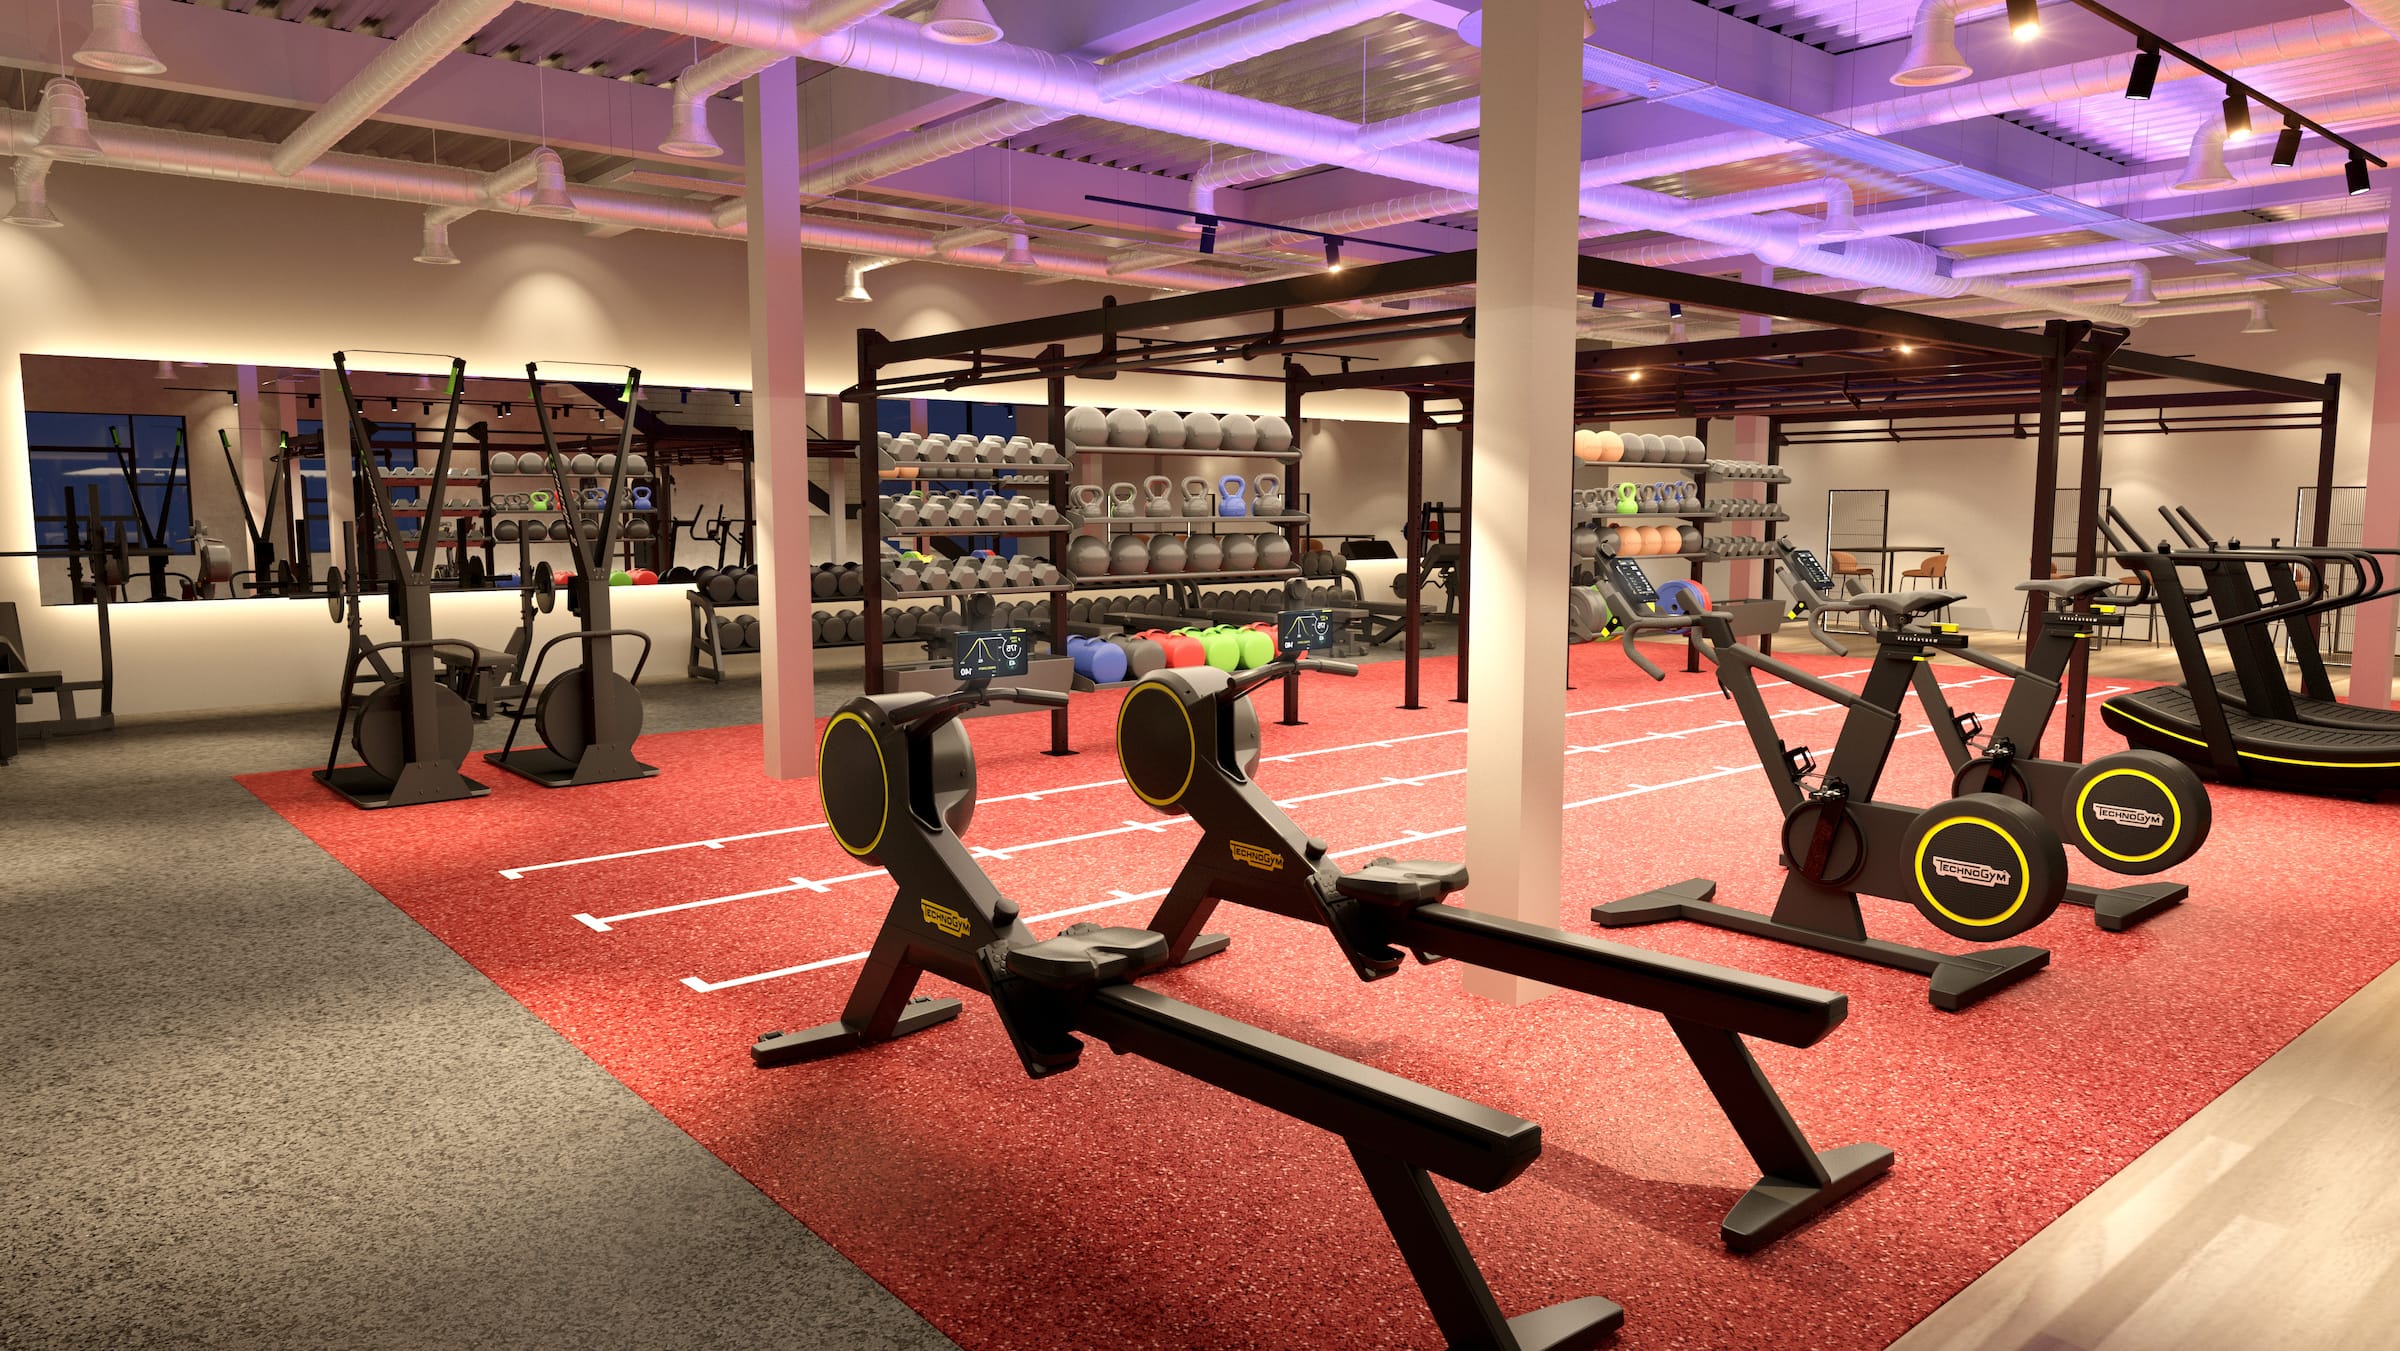 New Flagship Lifestyle Fitness Facility Coming to Cheshunt in May